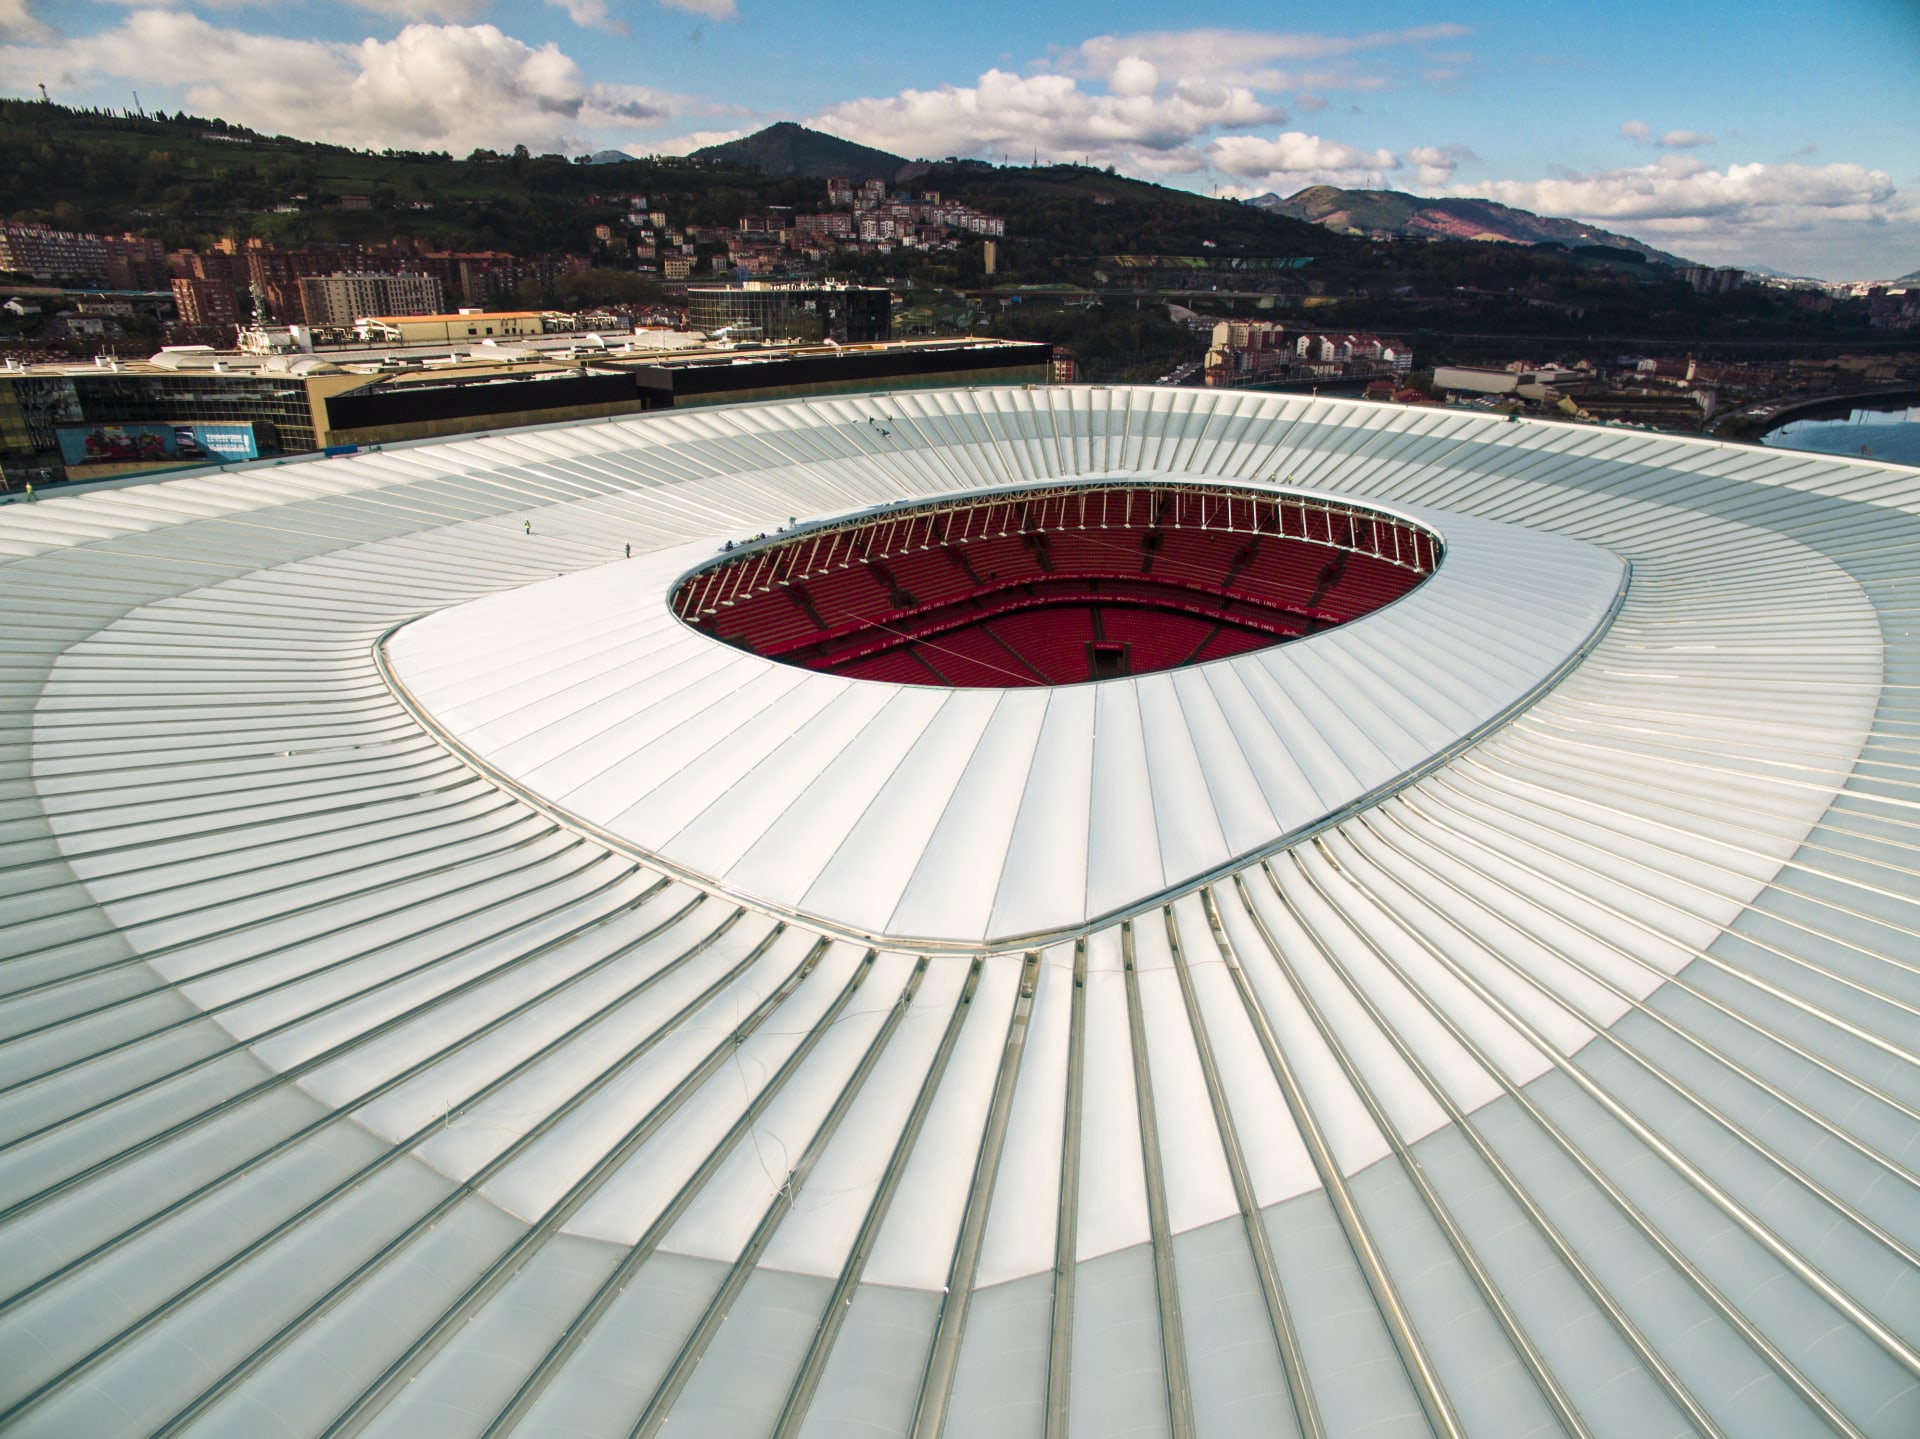 Many of our most striking roof designs are feats of structural engineering, spanning farther with less material (image: San Mames stadium, Bilbao, Spain - 2017 Structural Awards winner) 
Credit: IDOM